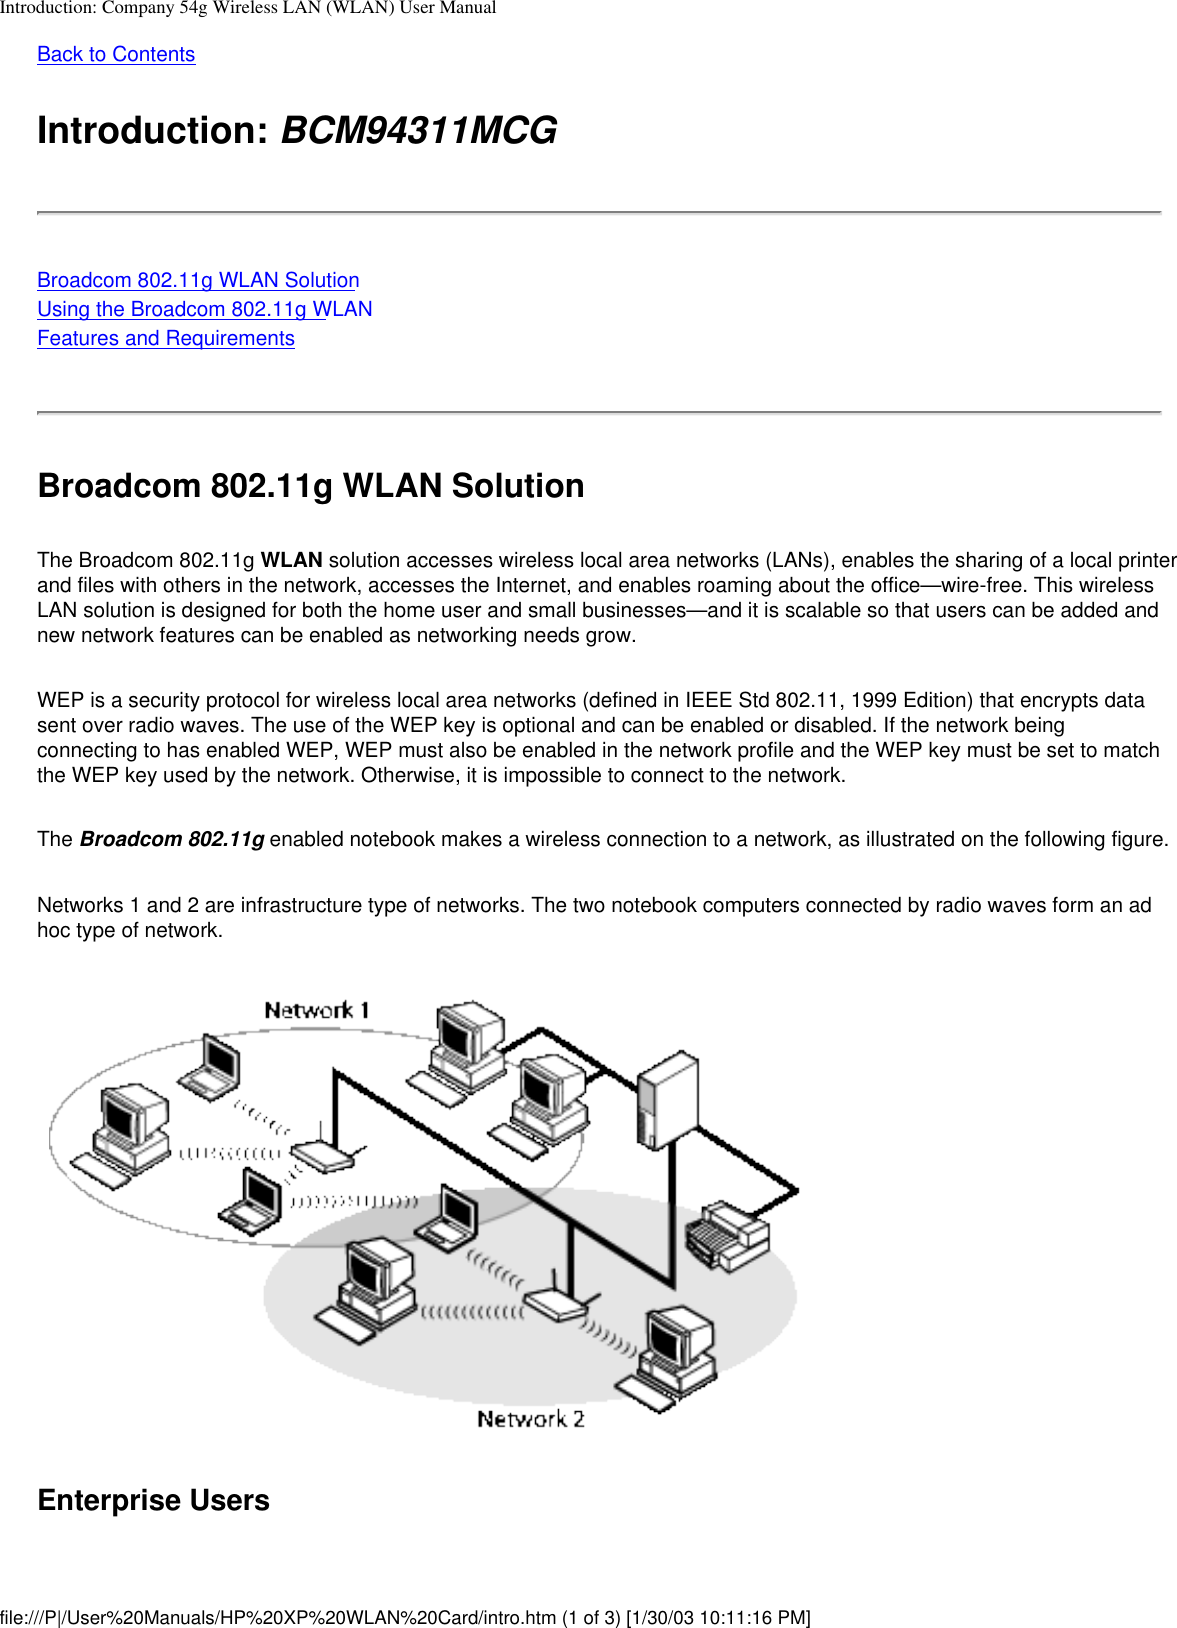 Introduction: Company 54g Wireless LAN (WLAN) User ManualBack to ContentsIntroduction: BCM94311MCGBroadcom 802.11g WLAN SolutionUsing the Broadcom 802.11g WLANFeatures and RequirementsBroadcom 802.11g WLAN SolutionThe Broadcom 802.11g WLAN solution accesses wireless local area networks (LANs), enables the sharing of a local printer and files with others in the network, accesses the Internet, and enables roaming about the office—wire-free. This wireless LAN solution is designed for both the home user and small businesses—and it is scalable so that users can be added and new network features can be enabled as networking needs grow.WEP is a security protocol for wireless local area networks (defined in IEEE Std 802.11, 1999 Edition) that encrypts data sent over radio waves. The use of the WEP key is optional and can be enabled or disabled. If the network being connecting to has enabled WEP, WEP must also be enabled in the network profile and the WEP key must be set to match the WEP key used by the network. Otherwise, it is impossible to connect to the network.The Broadcom 802.11g enabled notebook makes a wireless connection to a network, as illustrated on the following figure.Networks 1 and 2 are infrastructure type of networks. The two notebook computers connected by radio waves form an ad hoc type of network.Enterprise Usersfile:///P|/User%20Manuals/HP%20XP%20WLAN%20Card/intro.htm (1 of 3) [1/30/03 10:11:16 PM]